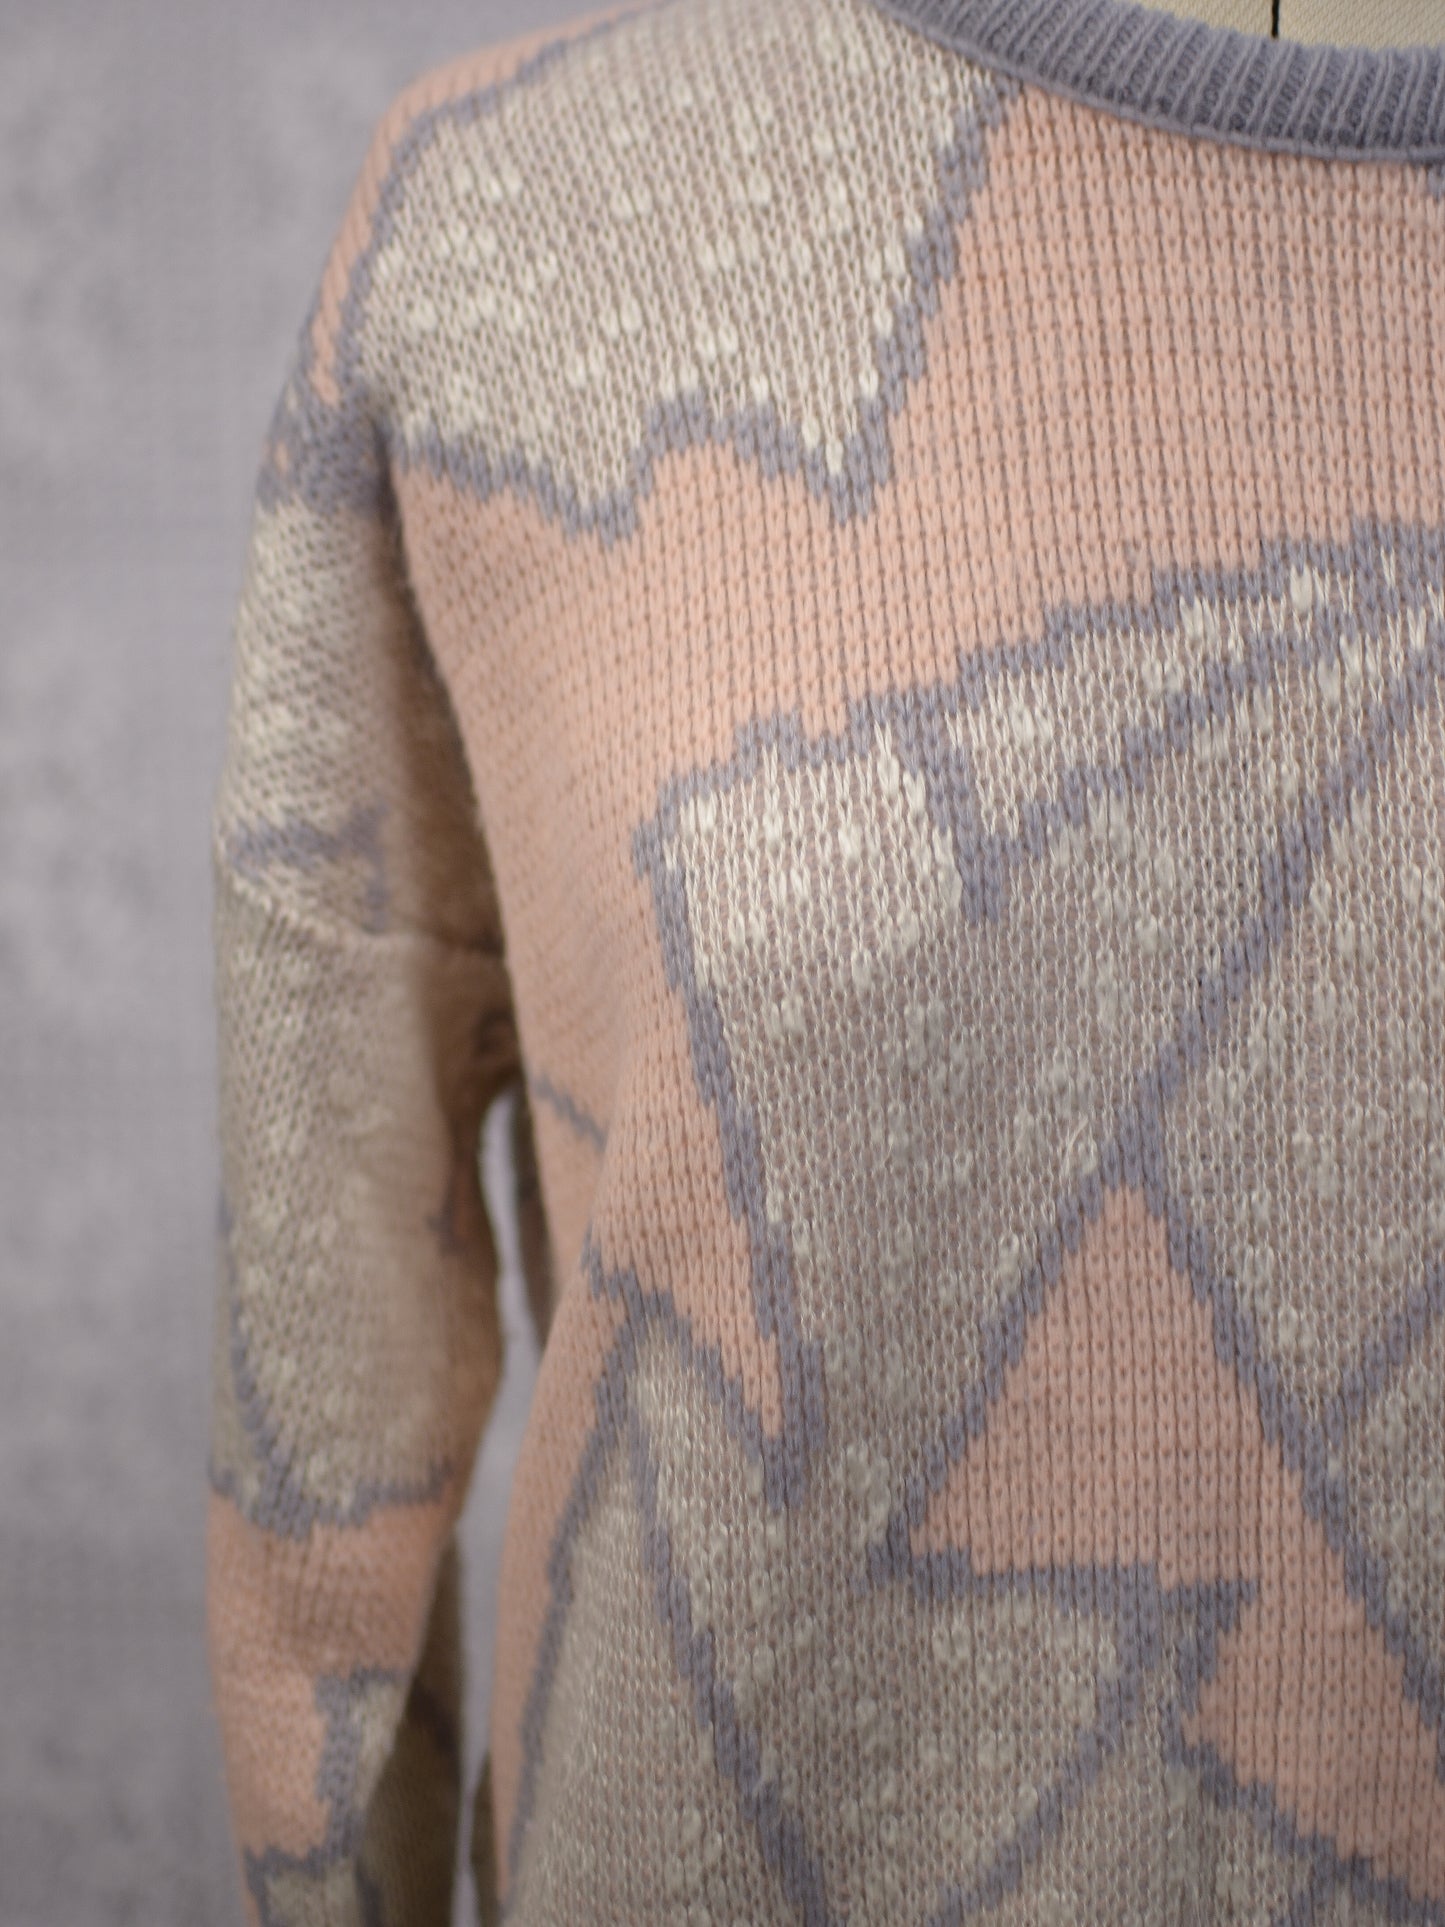 1980s pale pink and light blue abstract geometric pattern jumper